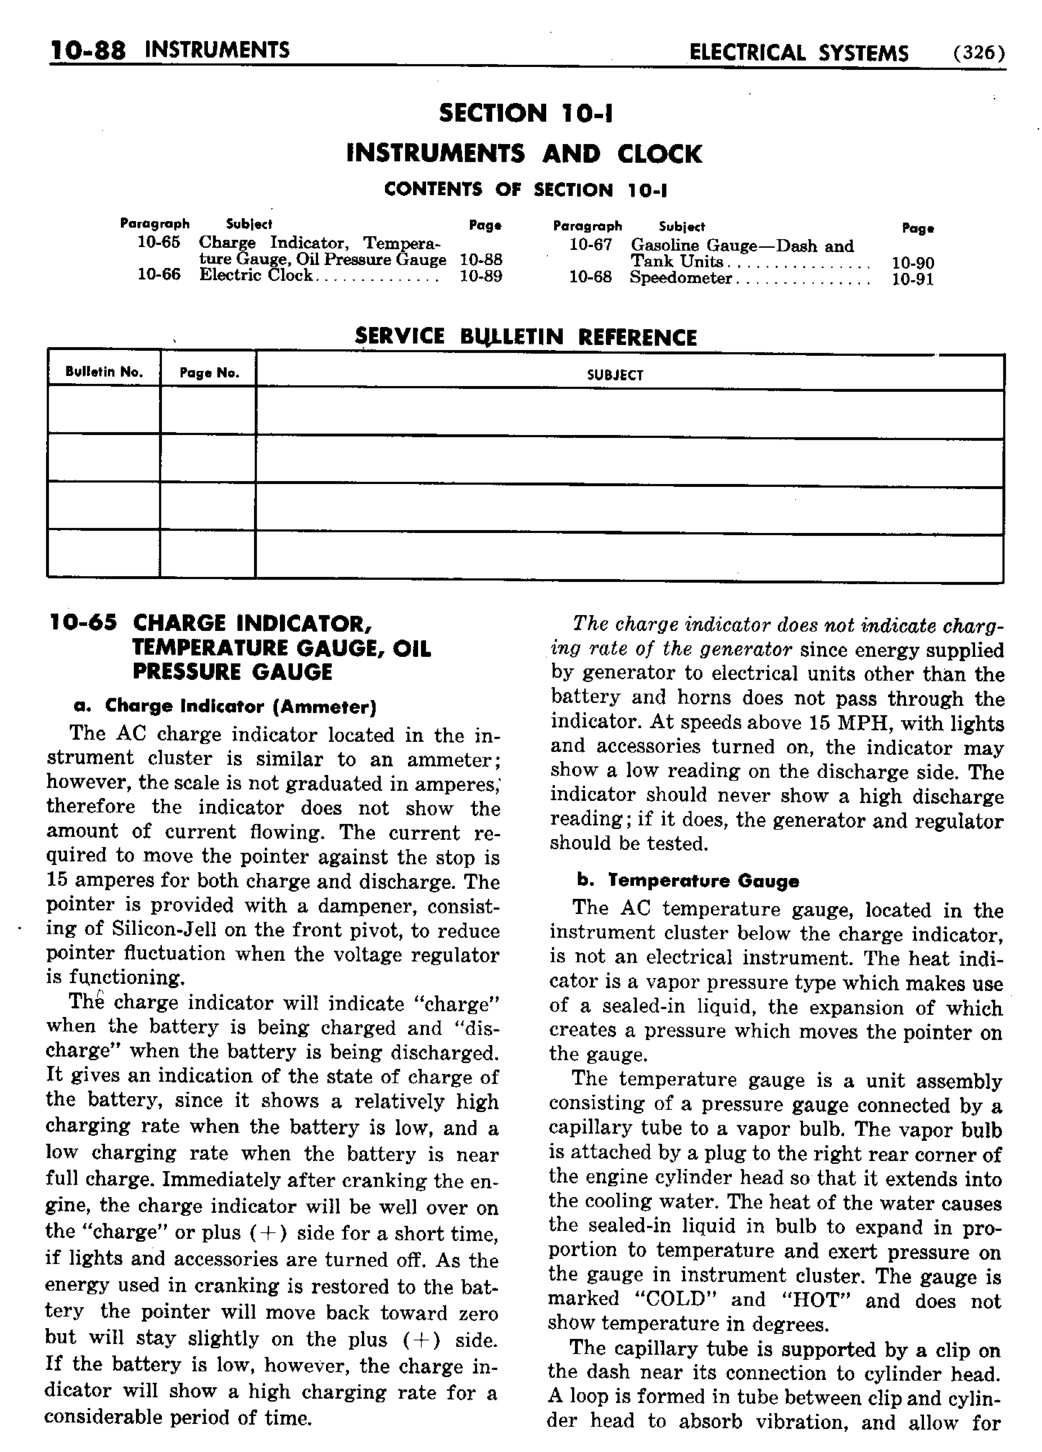 n_11 1950 Buick Shop Manual - Electrical Systems-088-088.jpg